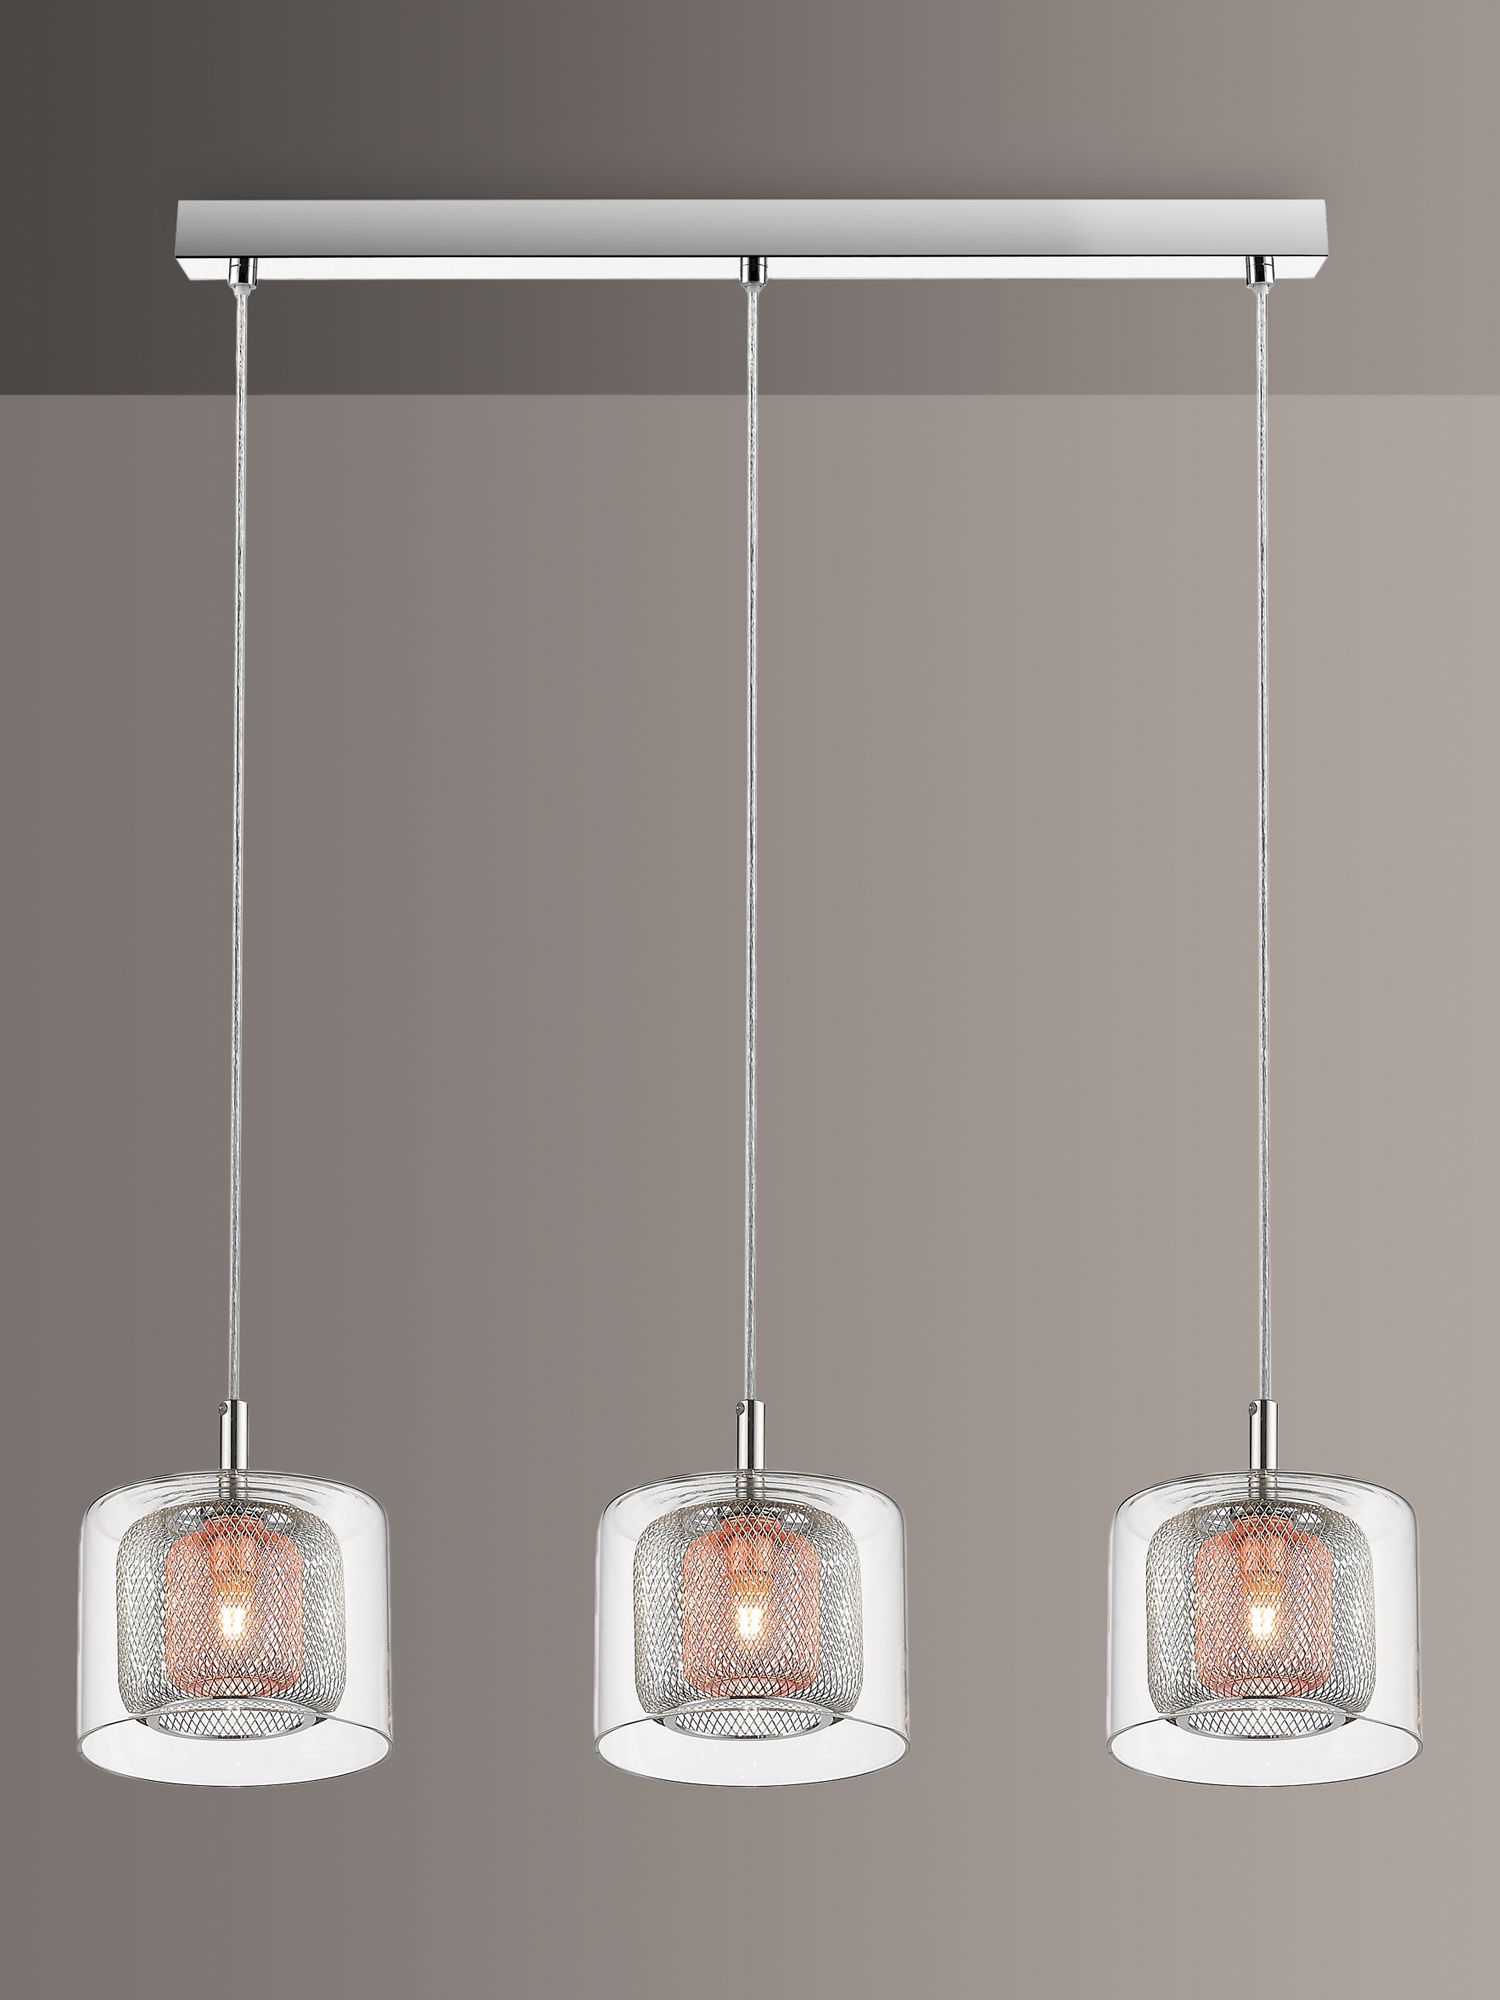 Photo of Impex laure mesh bar ceiling light clear/copper